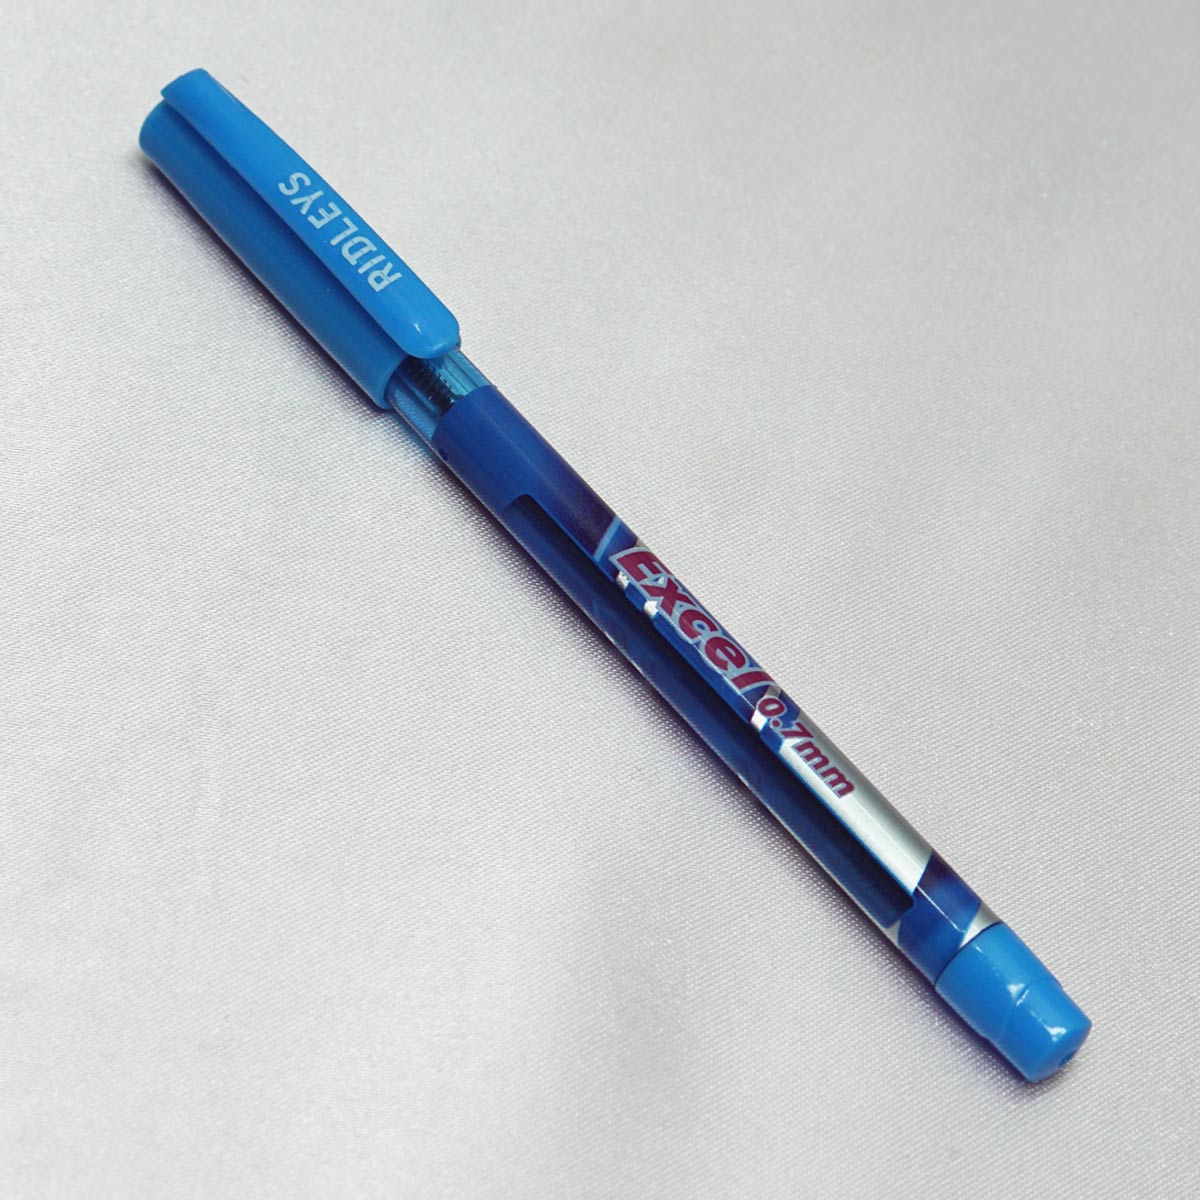 Ridleys Excel 0.7mm Blue Color Design Body With Blue Writing Cap Type Ball Pen SKU 22453